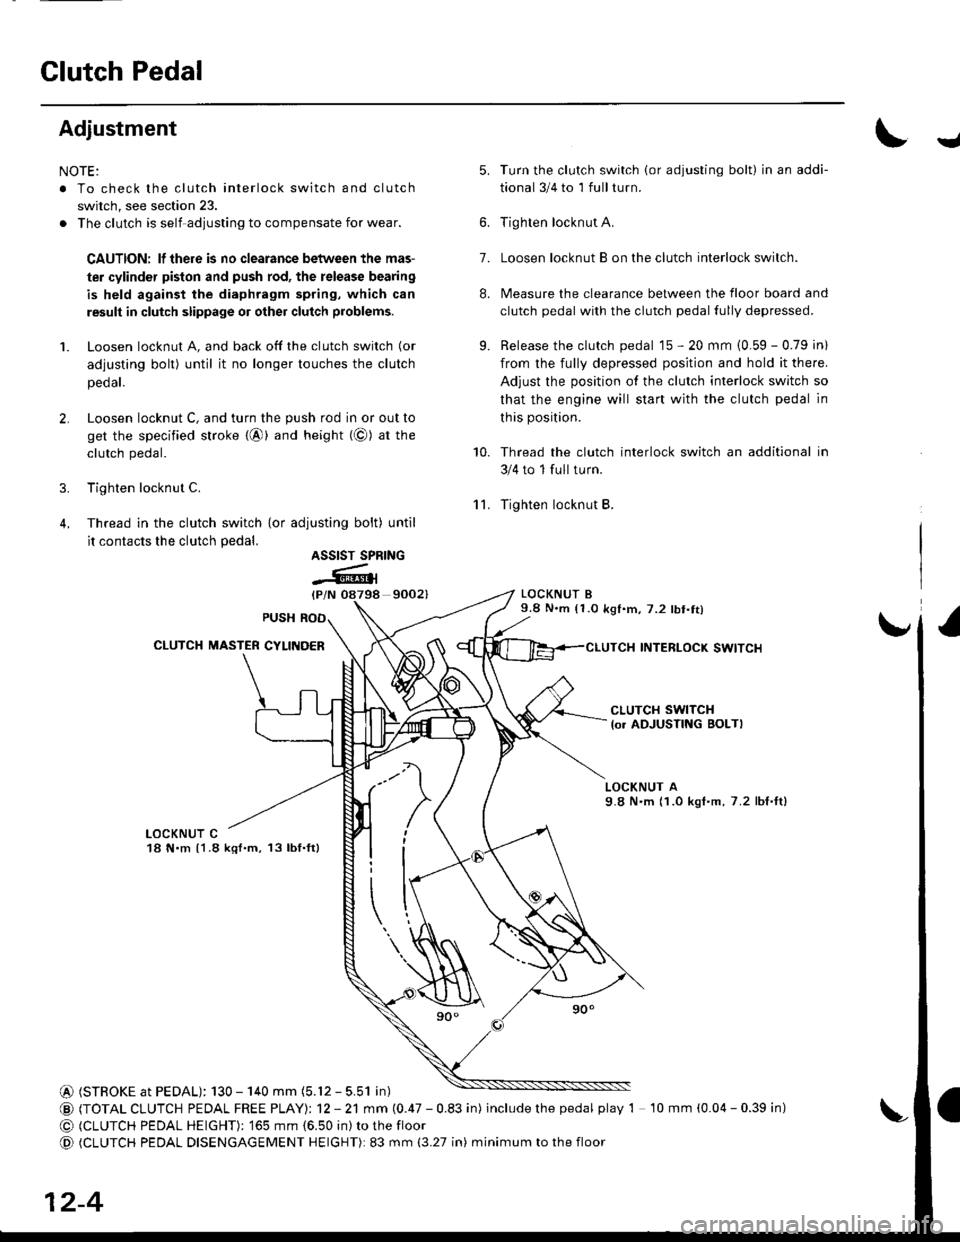 HONDA CIVIC 1996 6.G Workshop Manual Glutch Pedal
Adjustment
NOTE:
. To check the clutch interlock switch and clutch
switch, see section 23.
. The clutch is self-adjusting to compensate for wear.
CAUTION: lf there is no clearance between